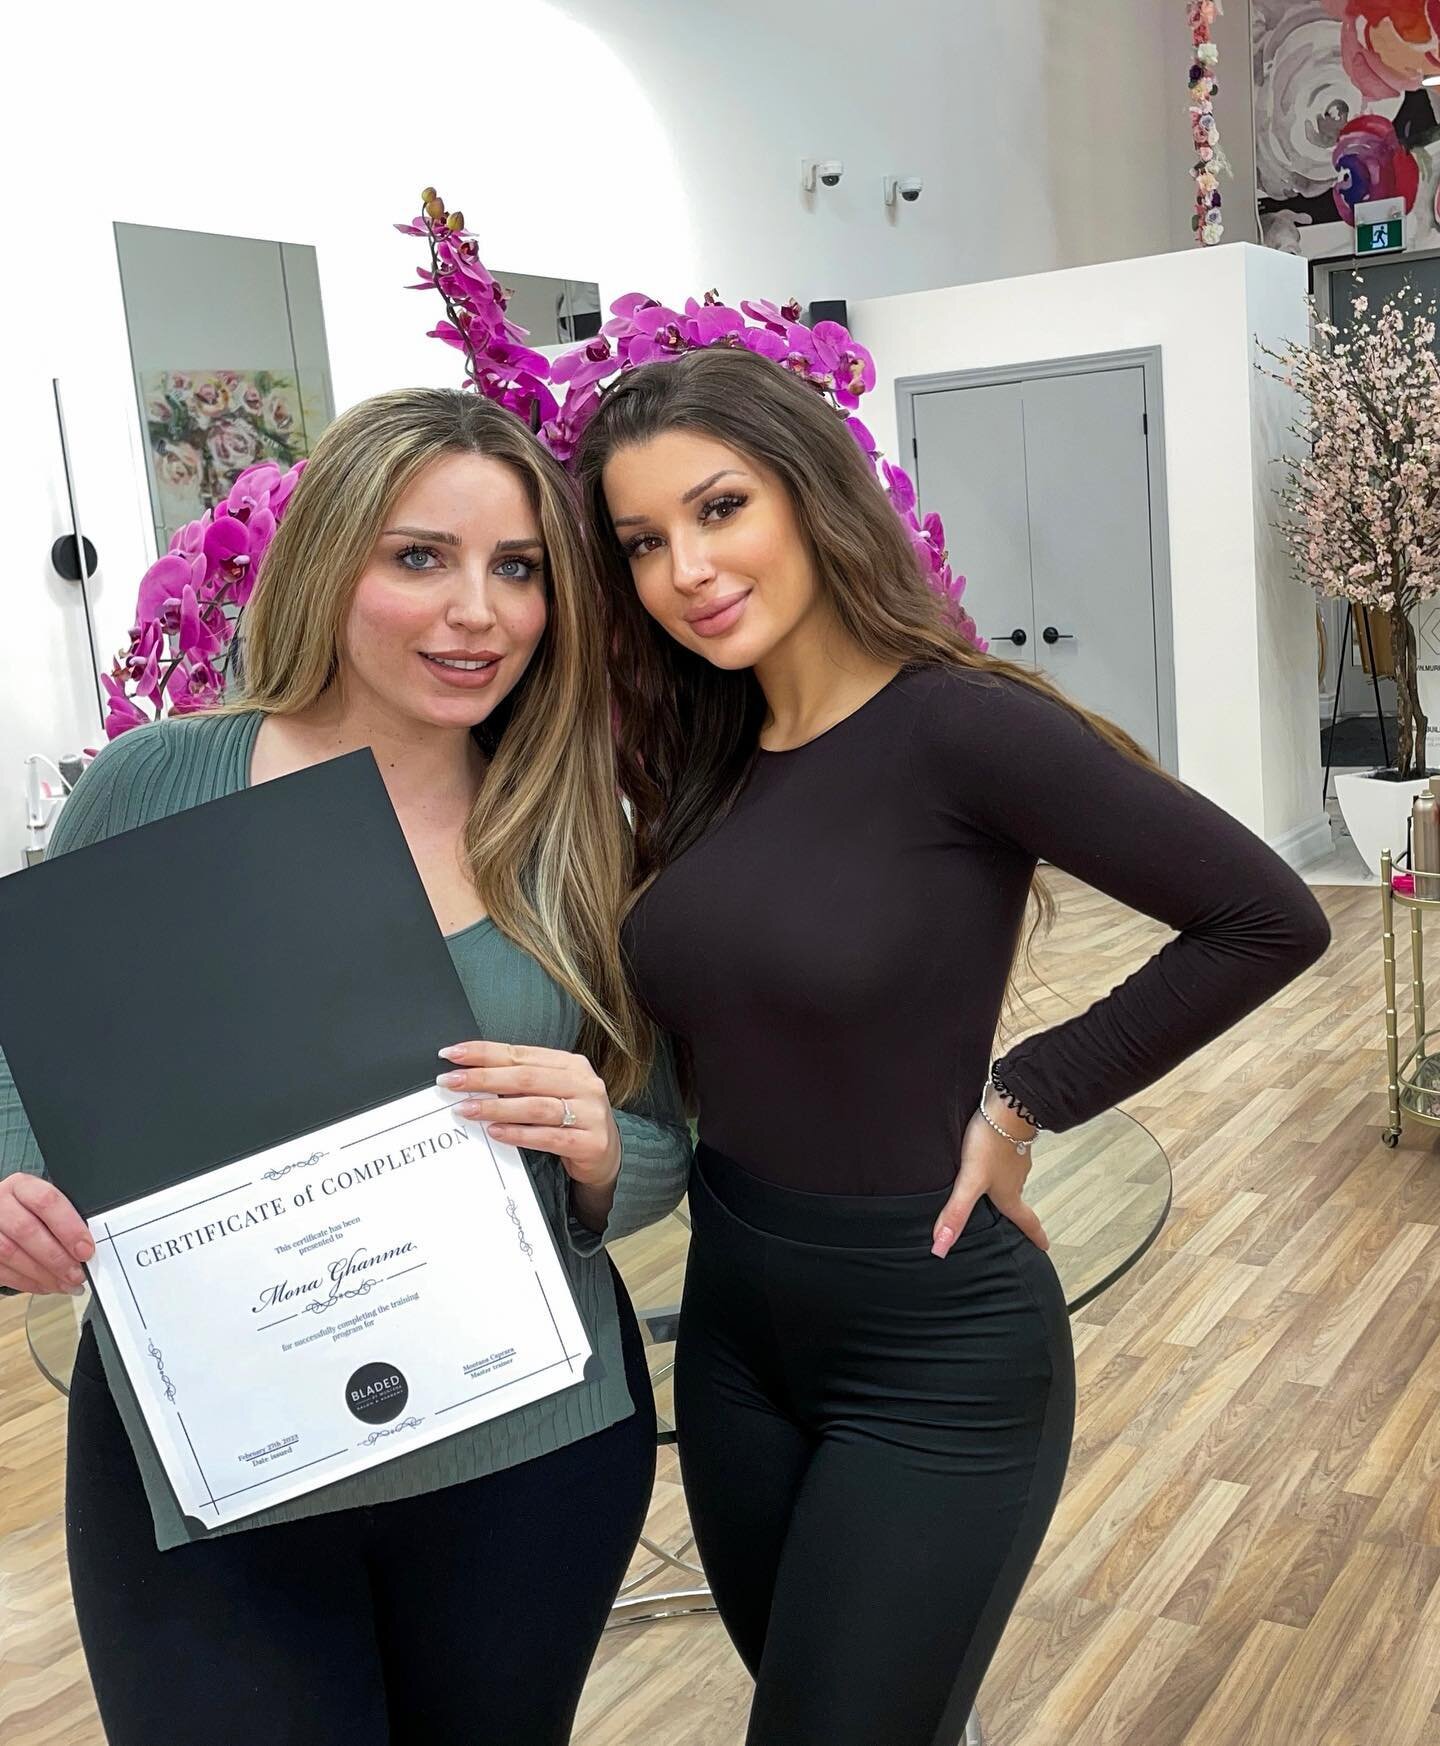 Congratulations to my beginner student who completed her training with me!🥂@redrosemedspa 
She absolutely killed it! I&rsquo;m so excited to see you expand and enter into the amazing PMU world
__________________________________________________
𝐍𝐞?